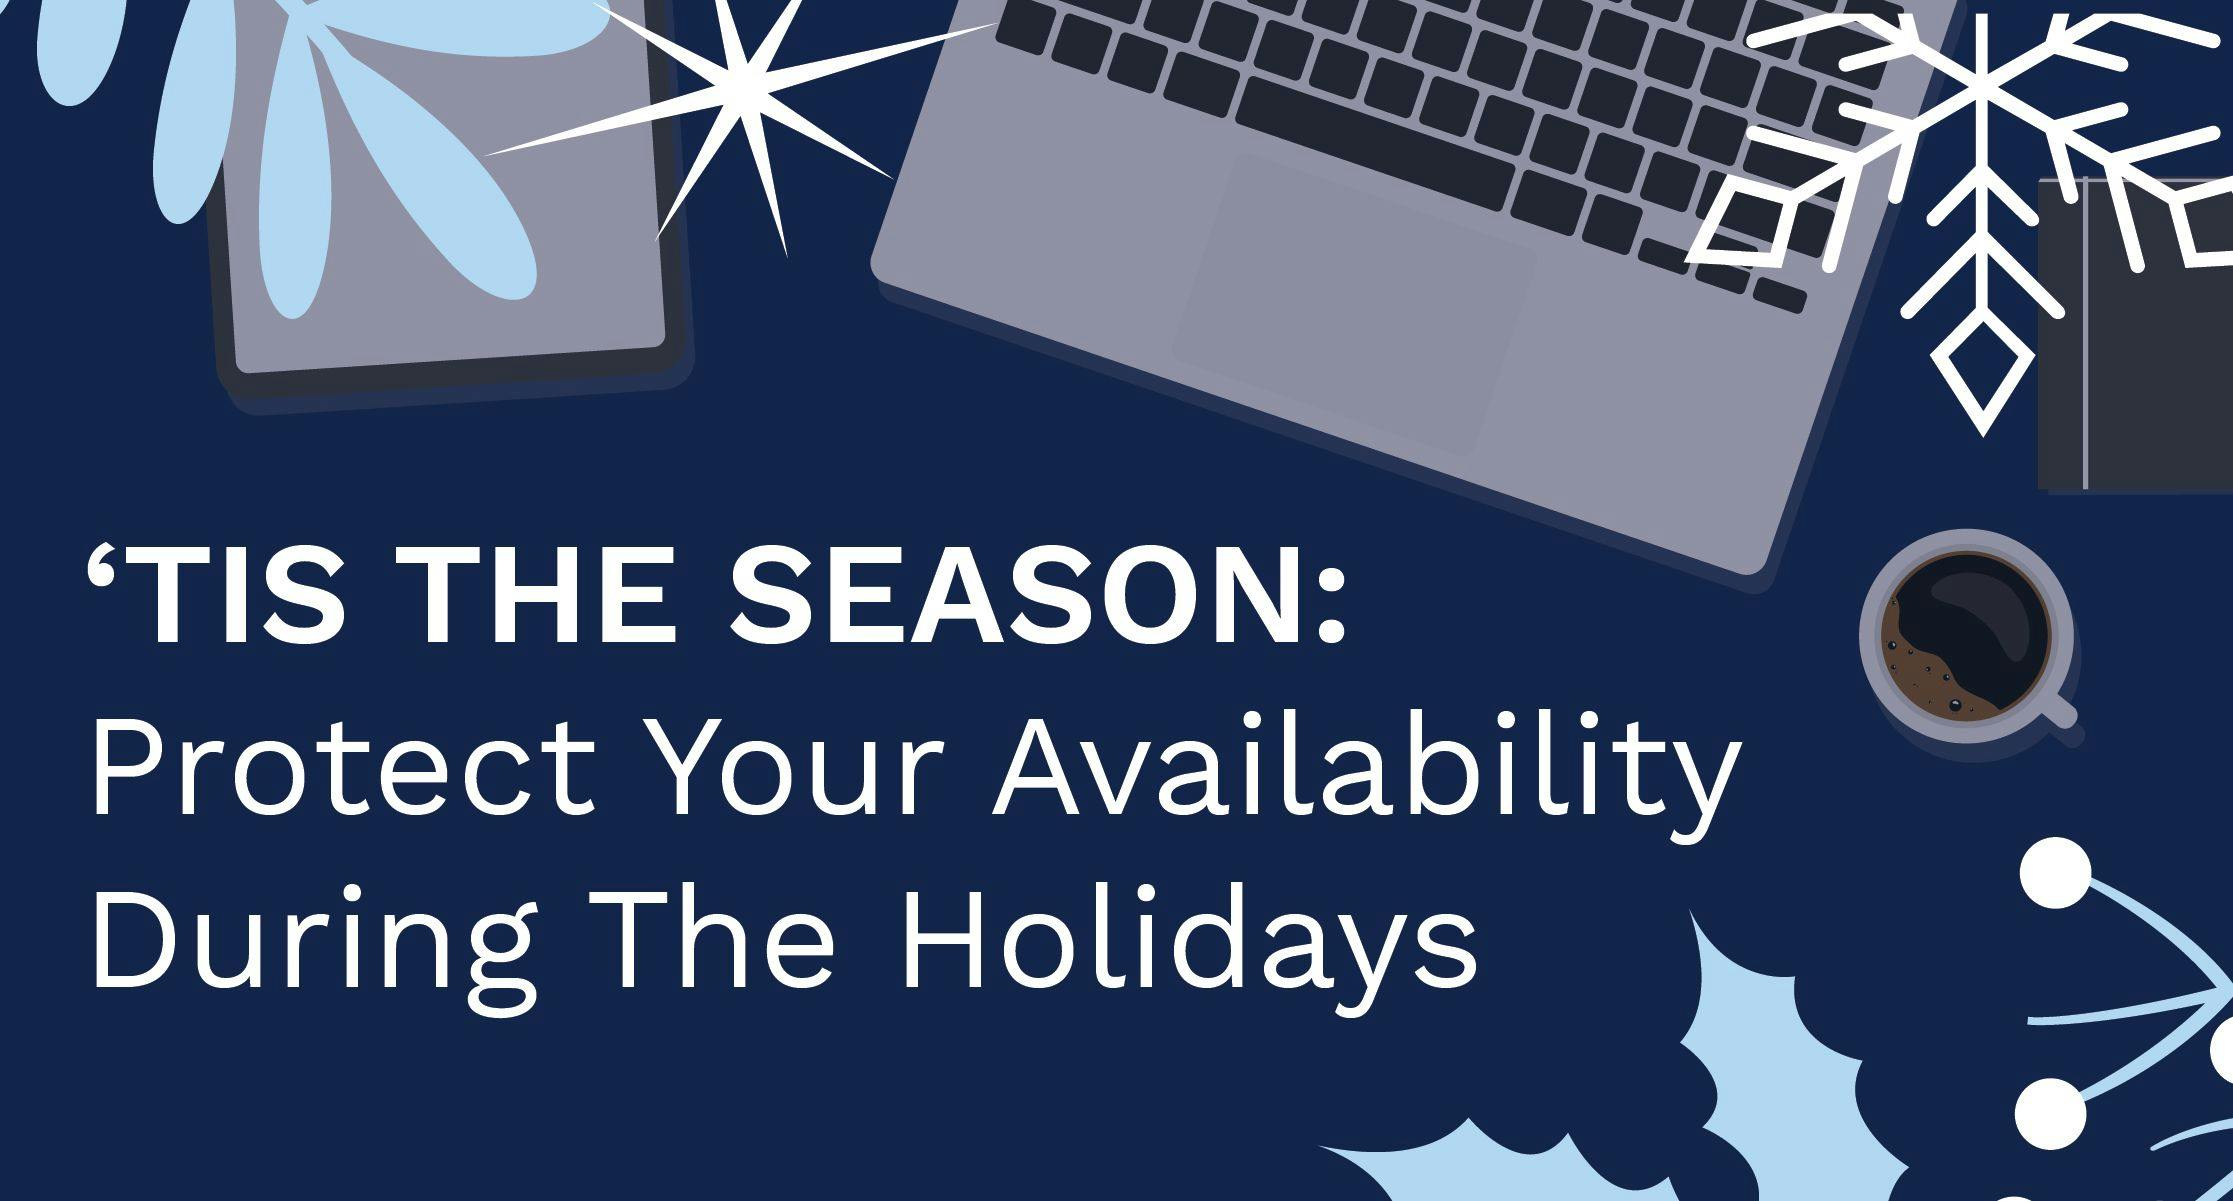 featured image - Protect Your Availability During The Holiday Season The Smart Way